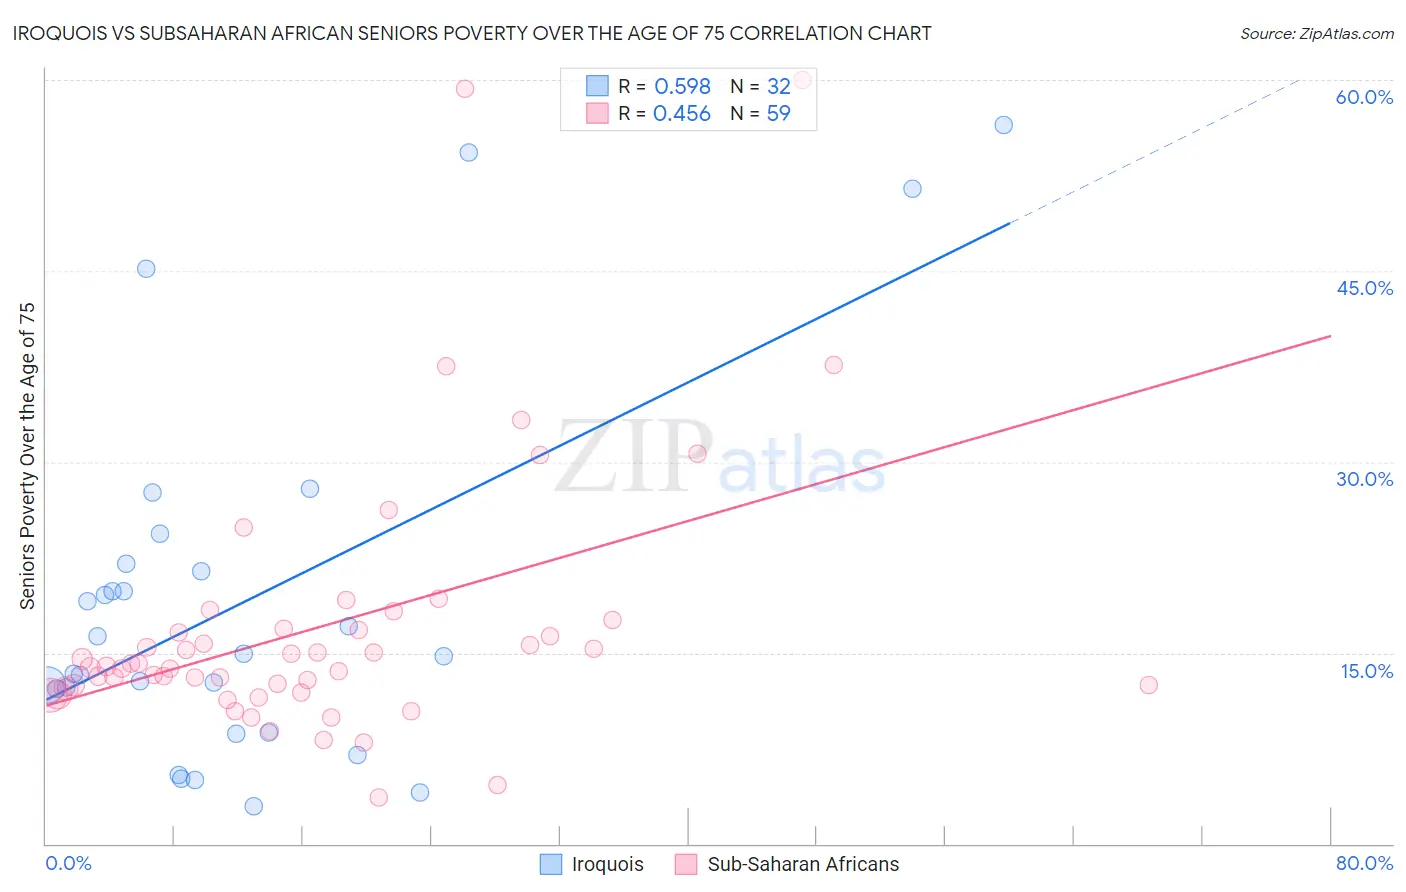 Iroquois vs Subsaharan African Seniors Poverty Over the Age of 75